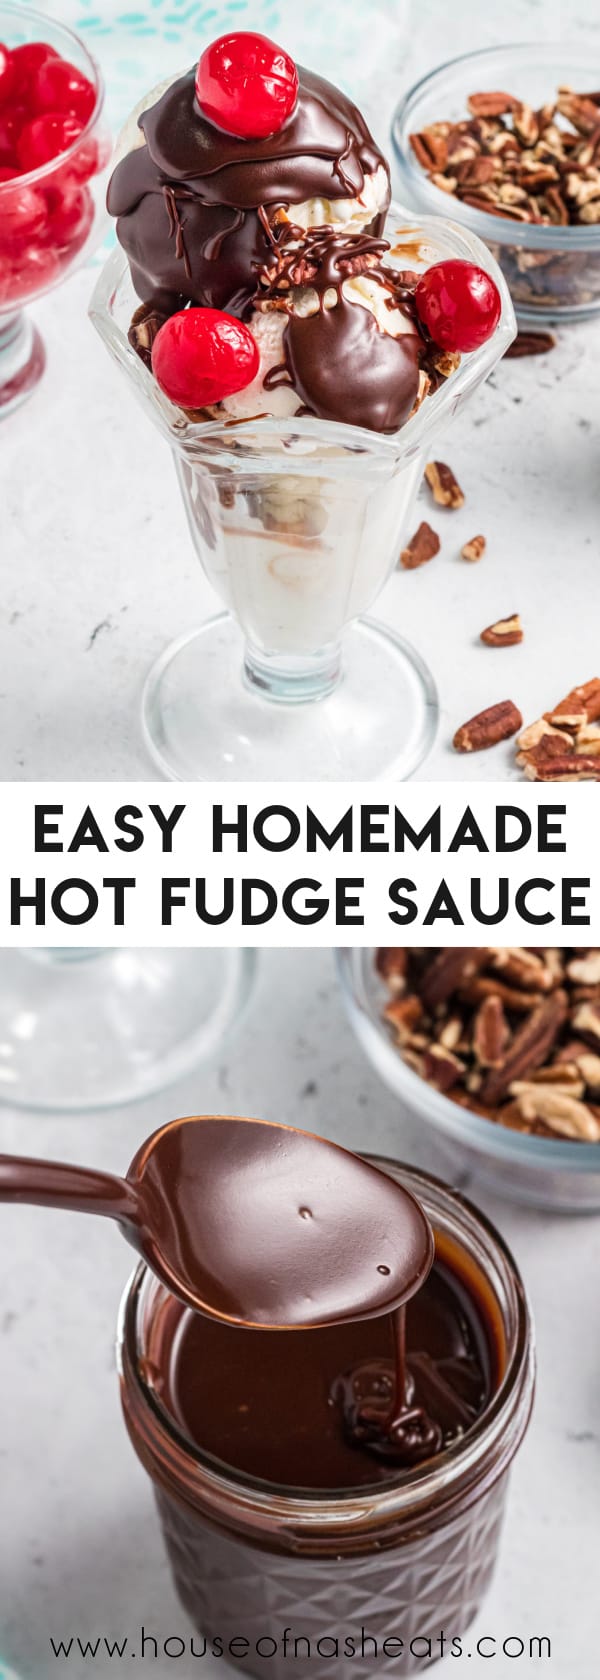 A collage of images of hot fudge sauce with text overlay.